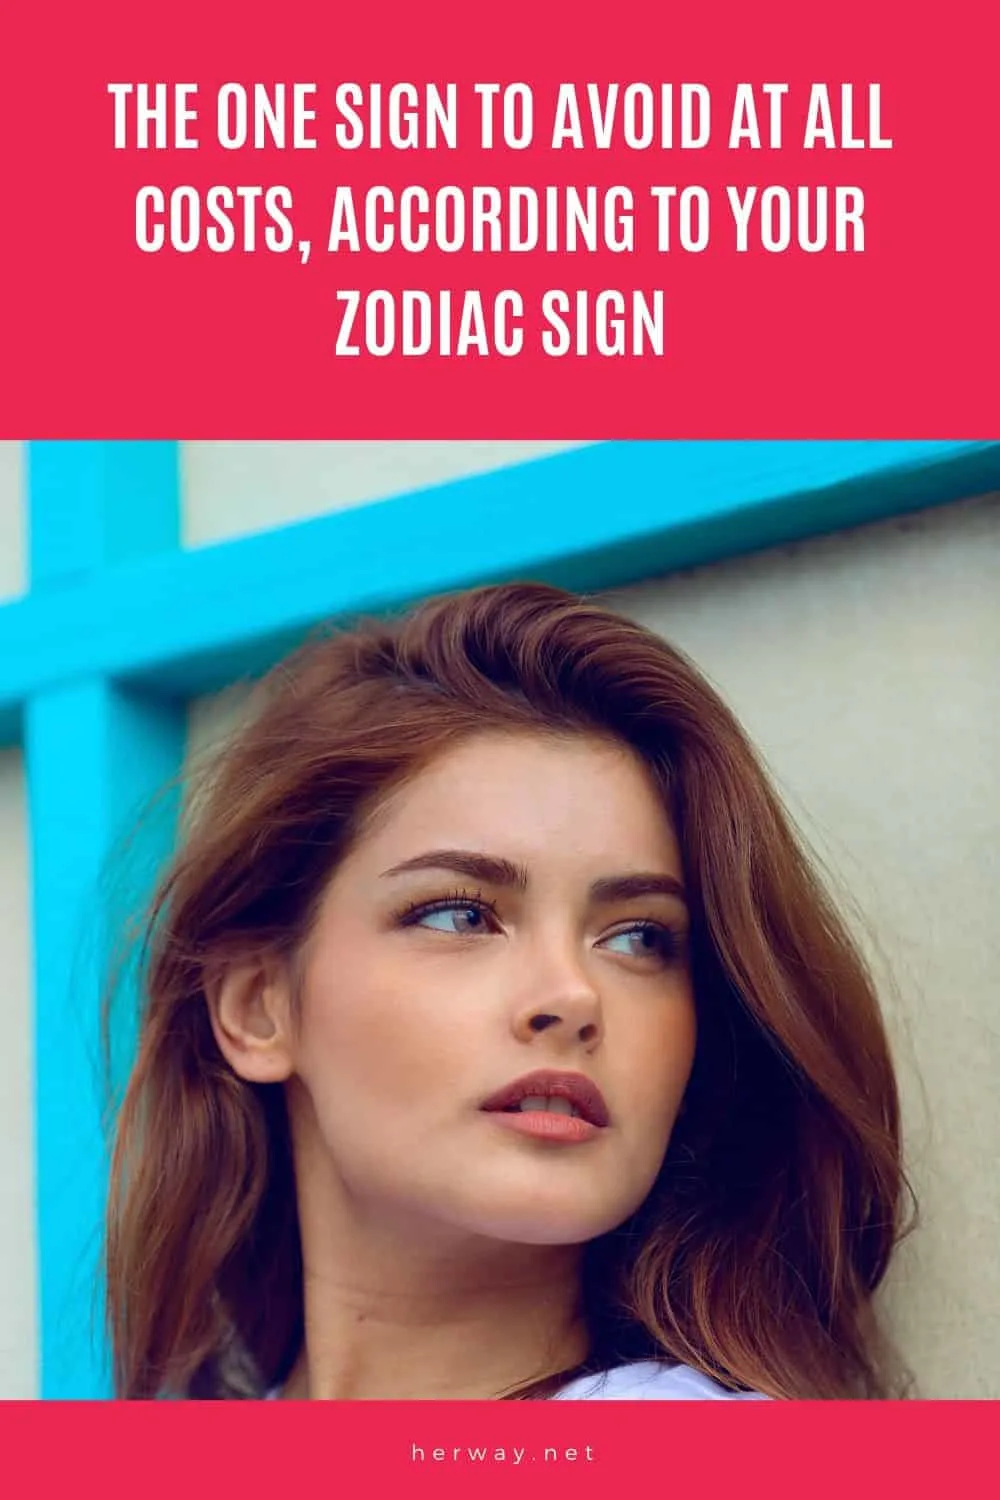 The One Sign To Avoid At All Costs, According To Your Zodiac Sign